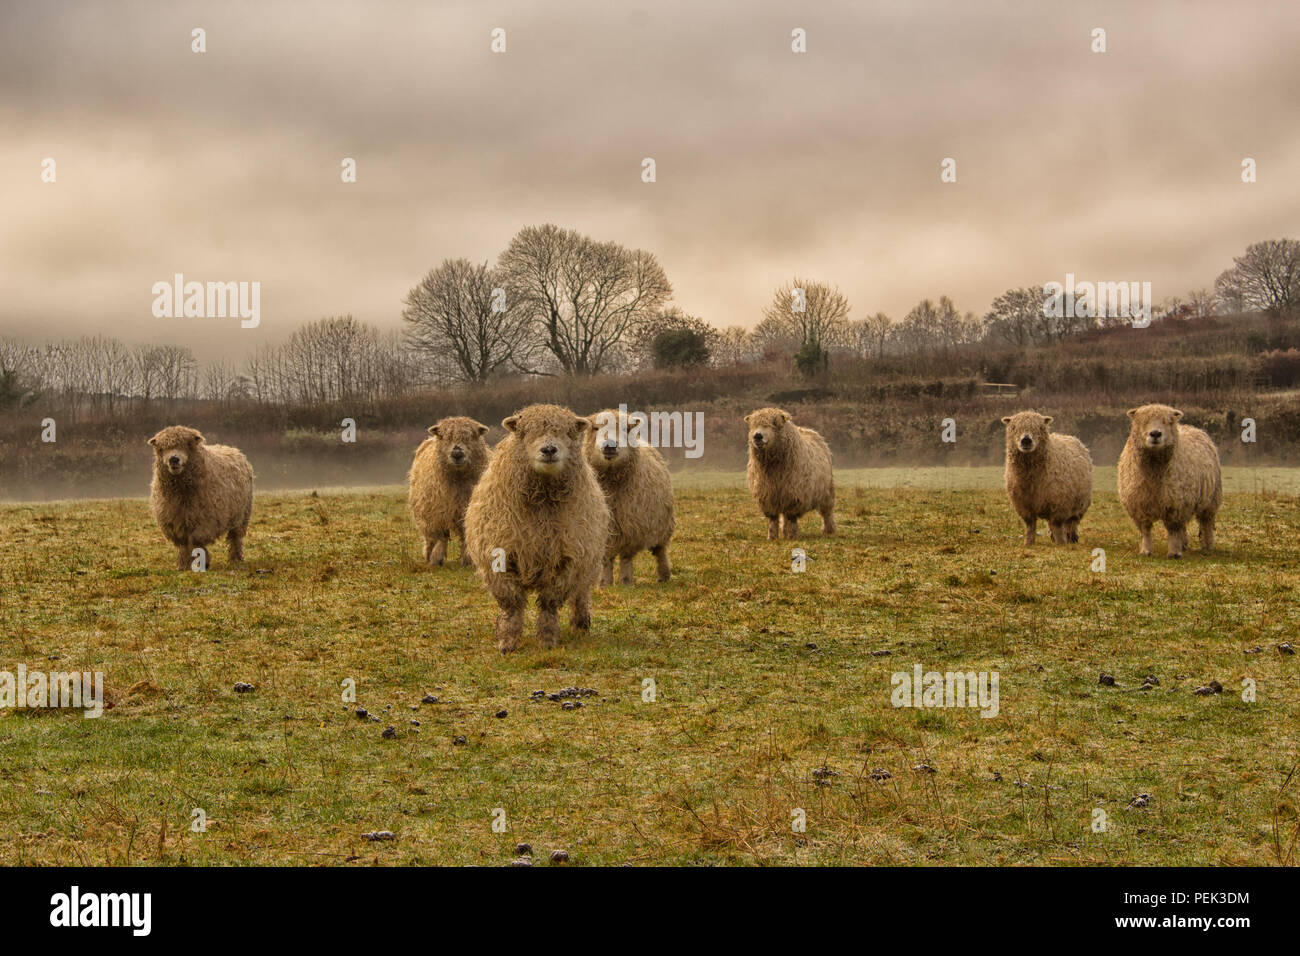 Sheep in a field all looking the same way Stock Photo